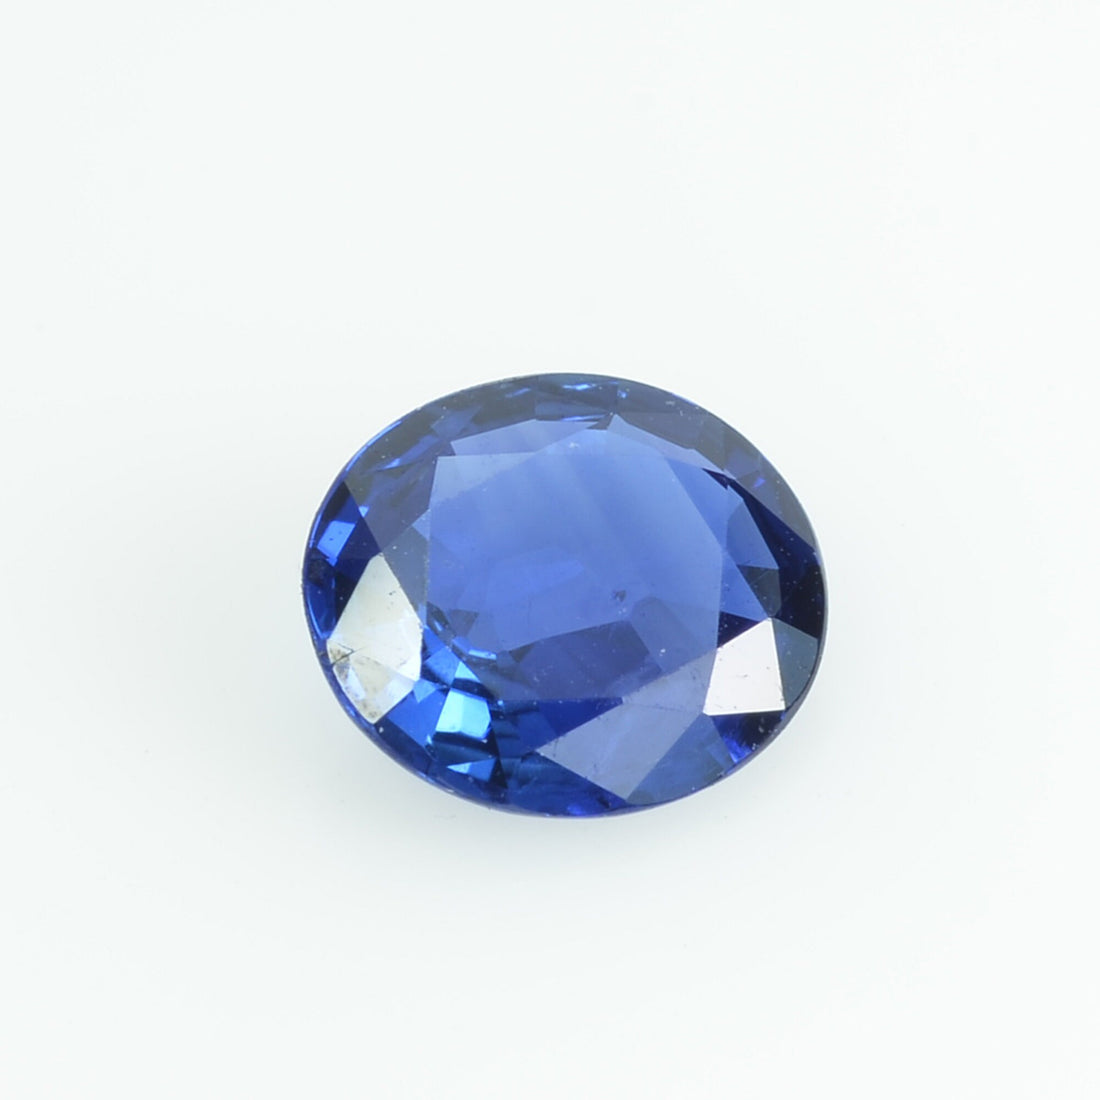 1.14 Cts Natural Blue sapphire loose gemstone oval cut